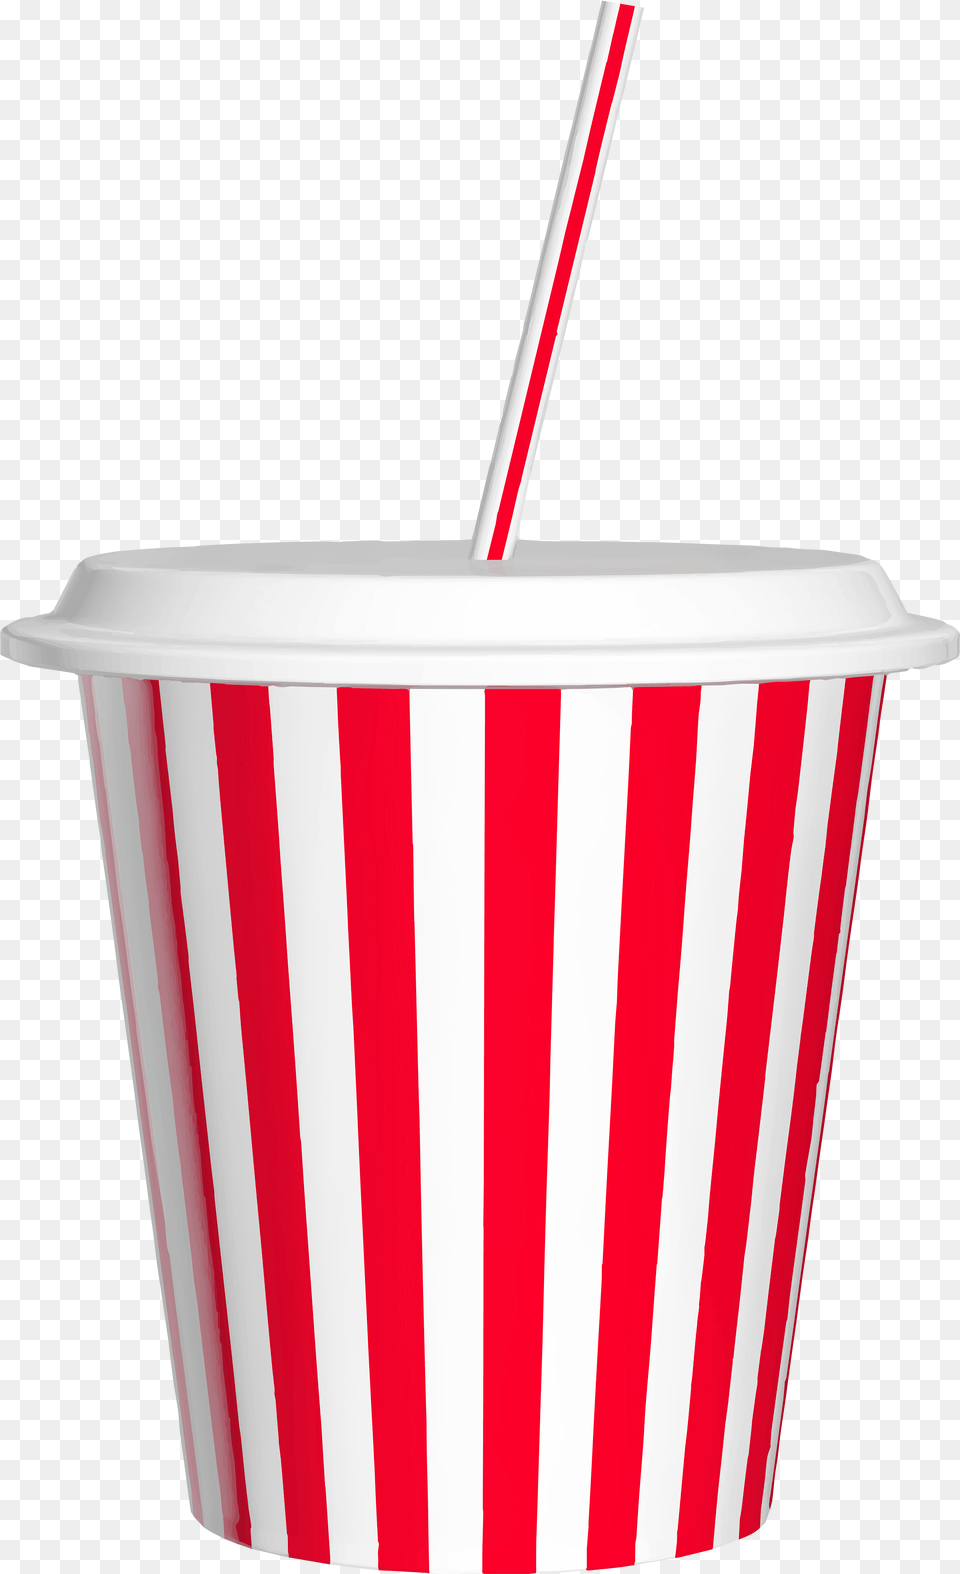 Drink Cup With Straw Clip Art Glass With Straw Clipart Transparent Background, Mailbox Png Image